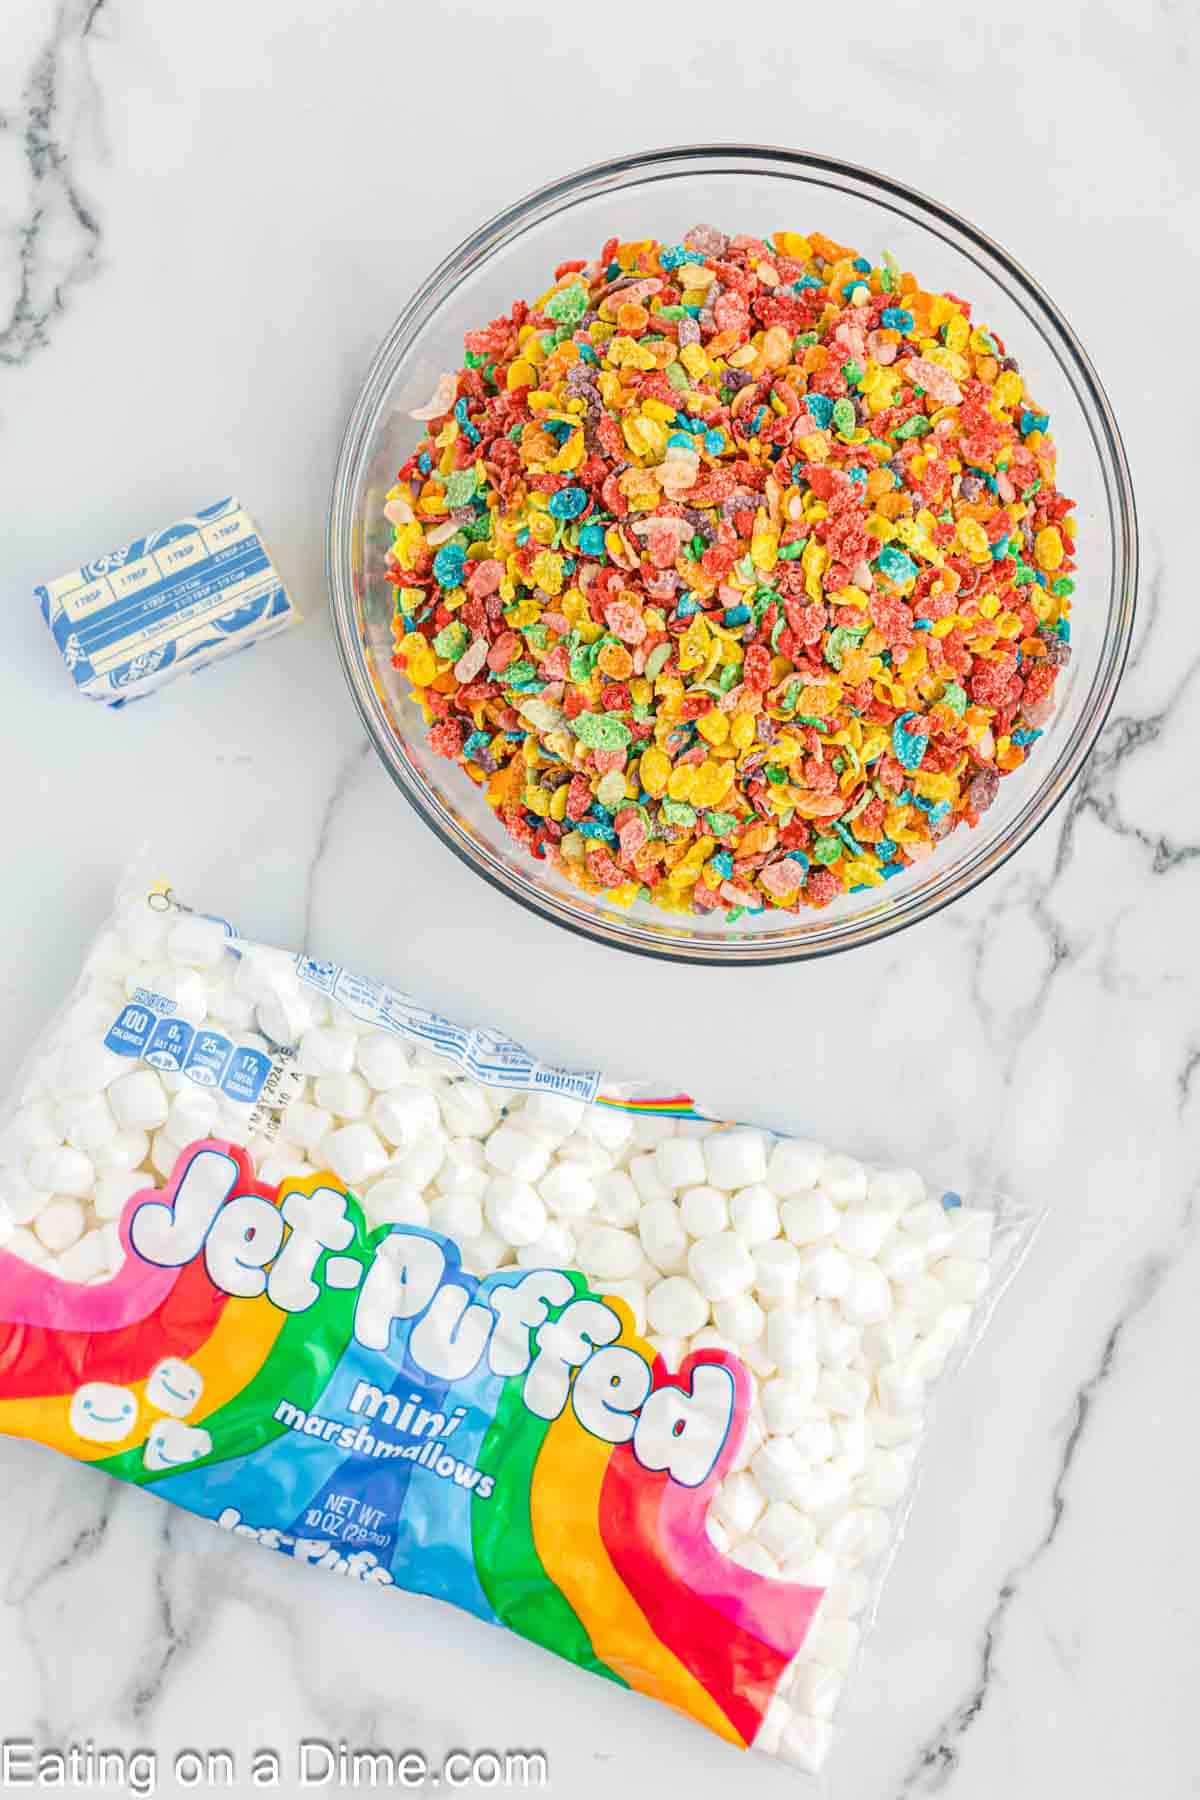 Fruit Pebbles treats ingredients - fruity pebbles cereals, butter, marshmallows